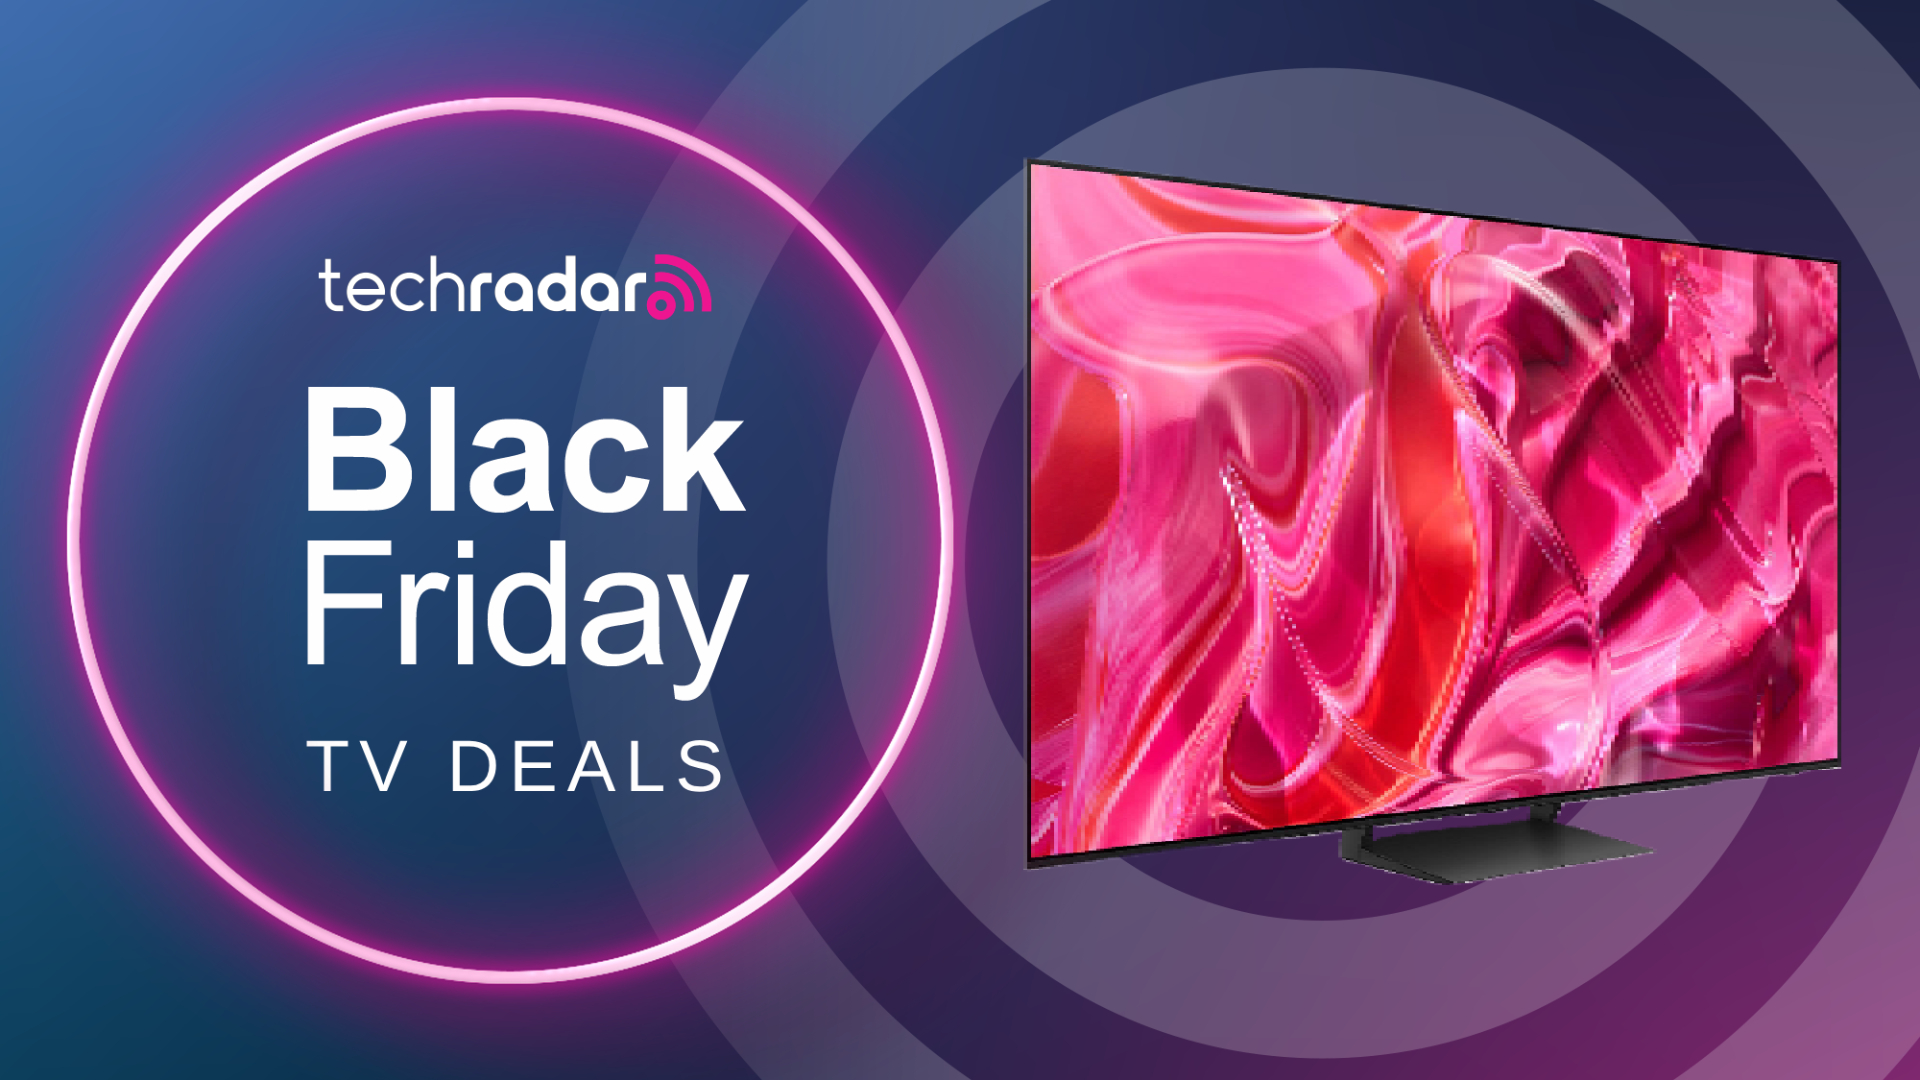 LG's C3 OLED, the ultimate PC gamer TV, is $500 off for Black Friday